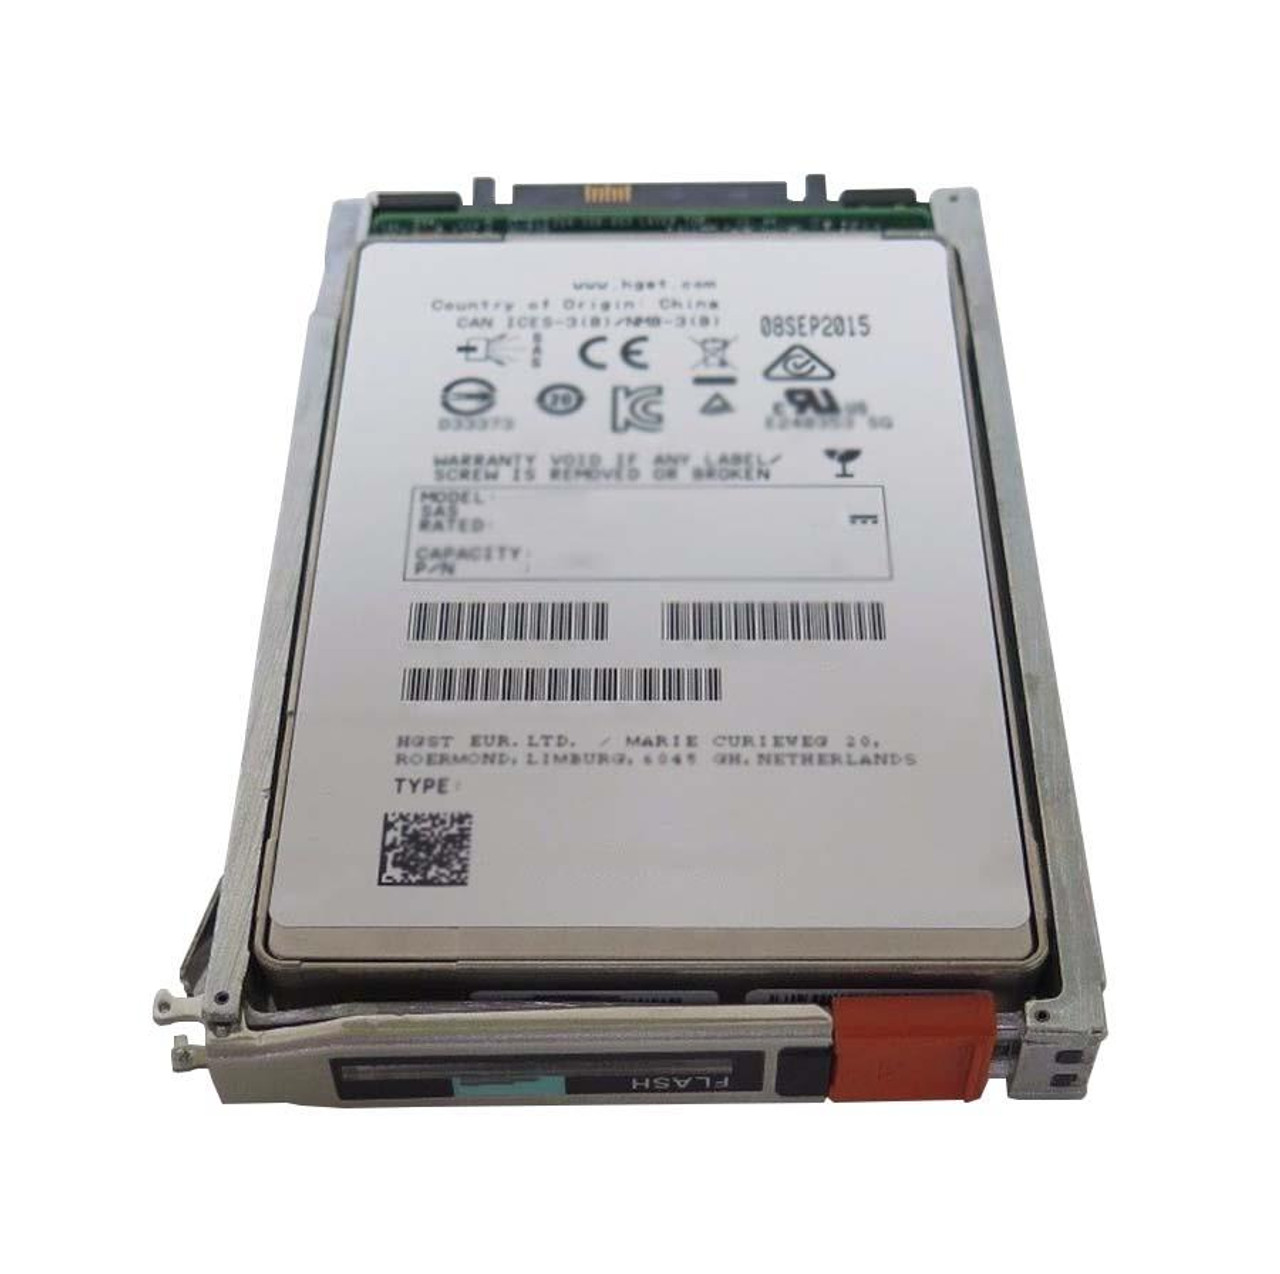 HS6FM8001BT2 EMC 800GB SAS 6Gbps 2.5-inch Internal Solid State Drive (SSD) with RAID1 for VMAX 400K